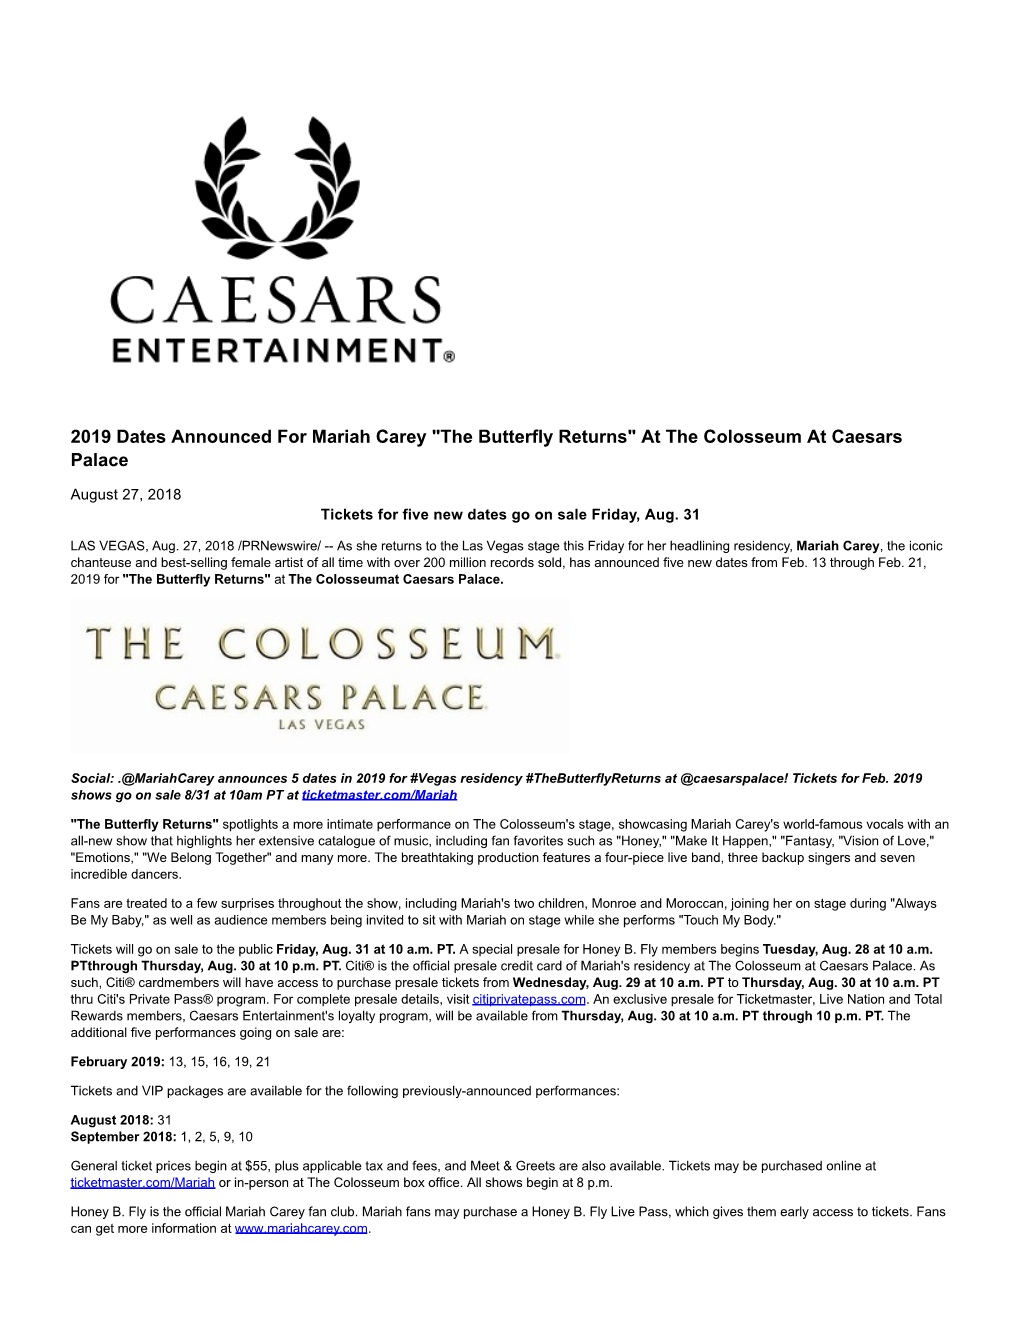 2019 Dates Announced for Mariah Carey "The Butterfly Returns" at the Colosseum at Caesars Palace